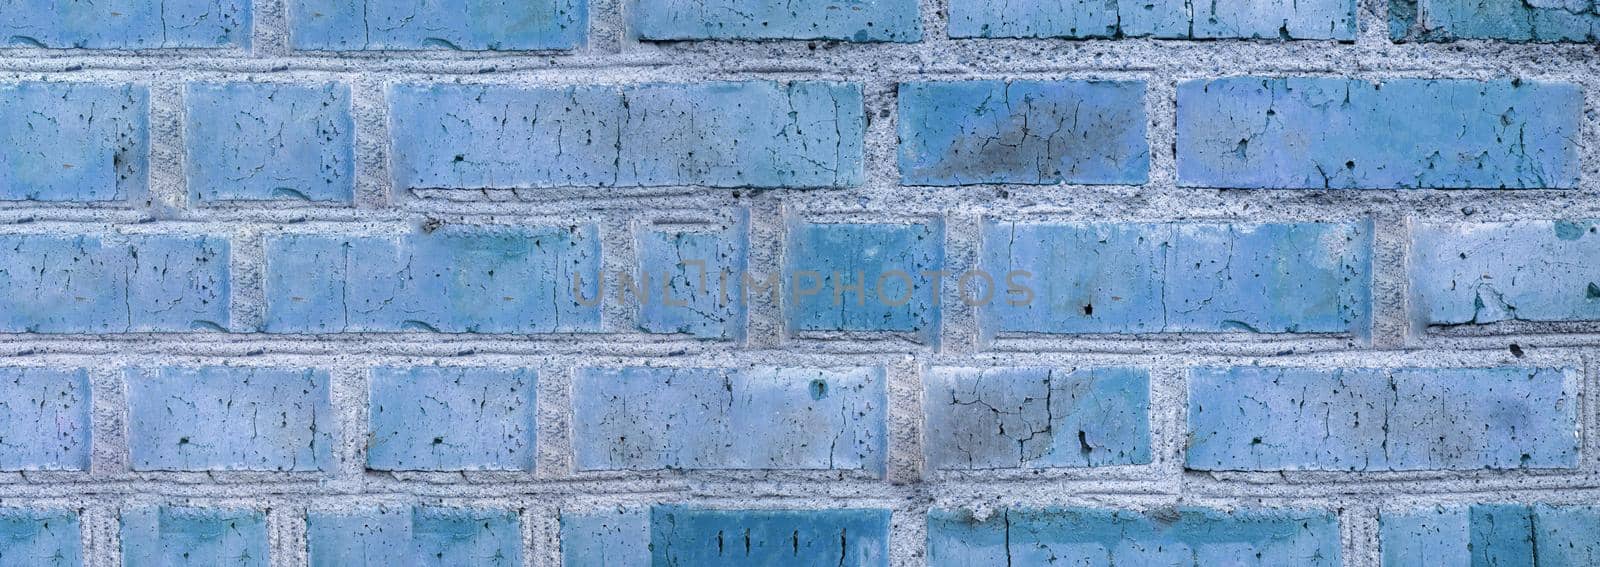 Banner background of an old brick wall, vintage brickwork texture, close-up, blue tinting by claire_lucia